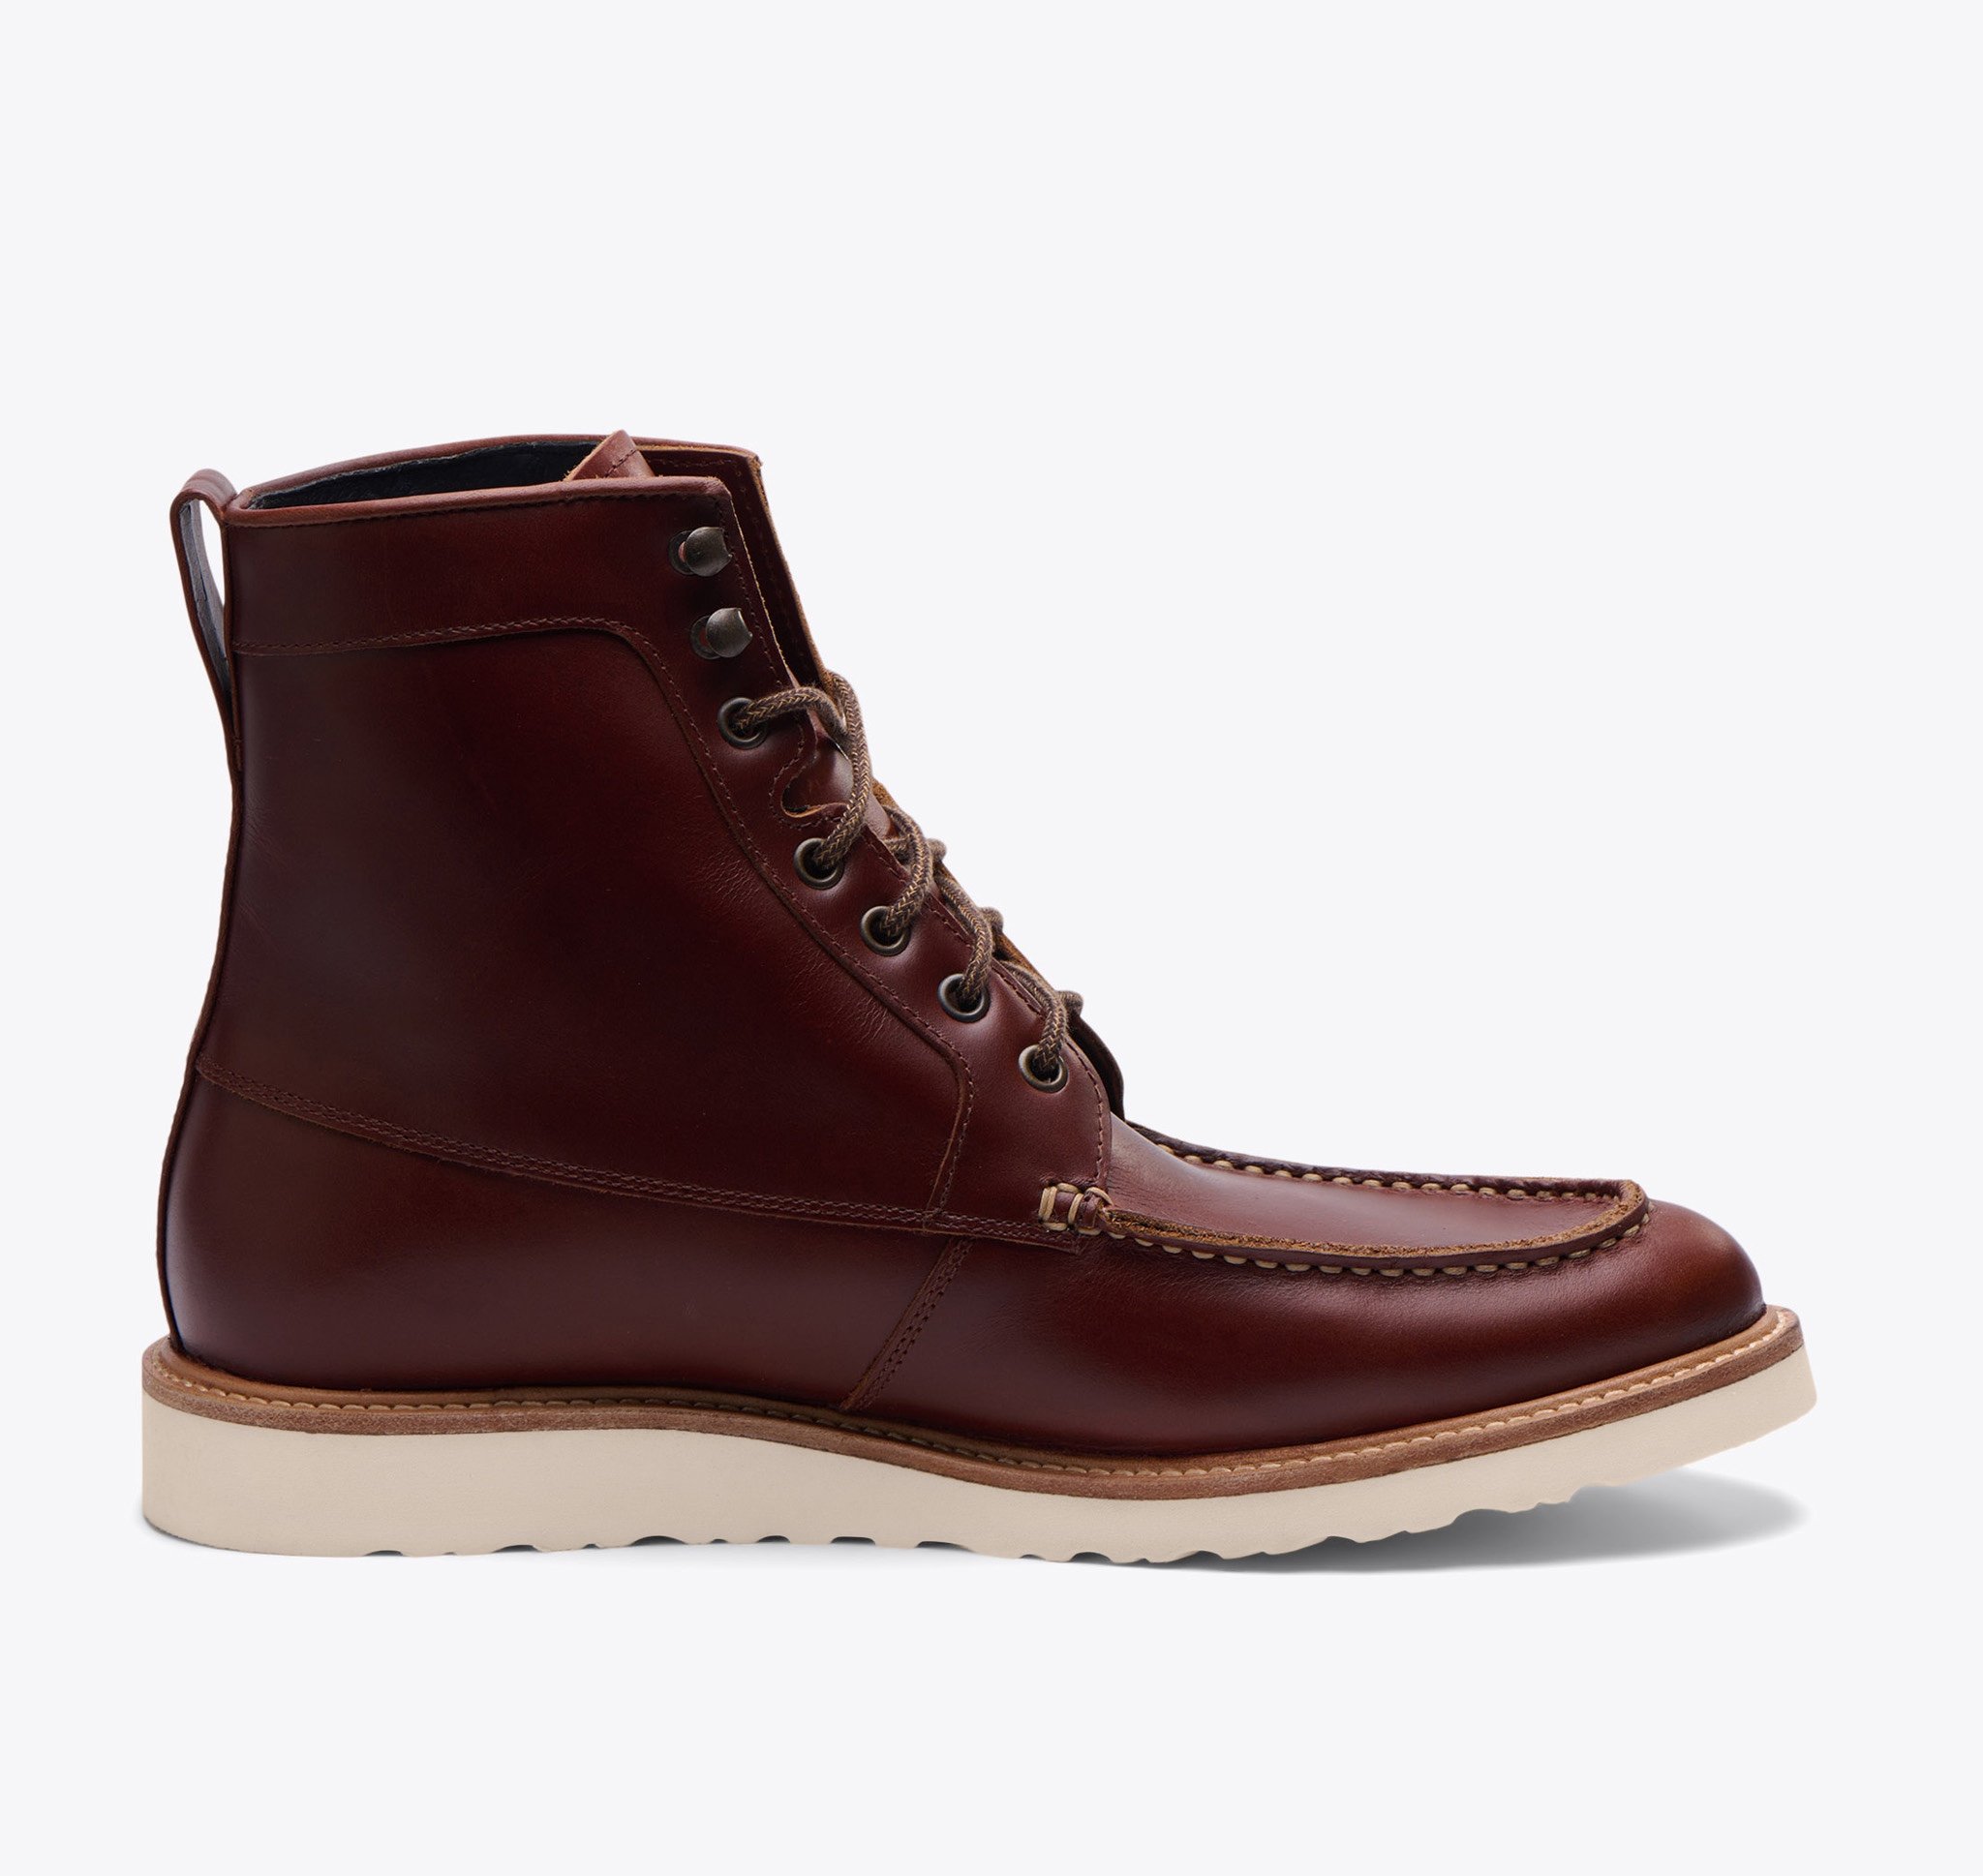 Nisolo All-Weather Mateo Boot Brandy